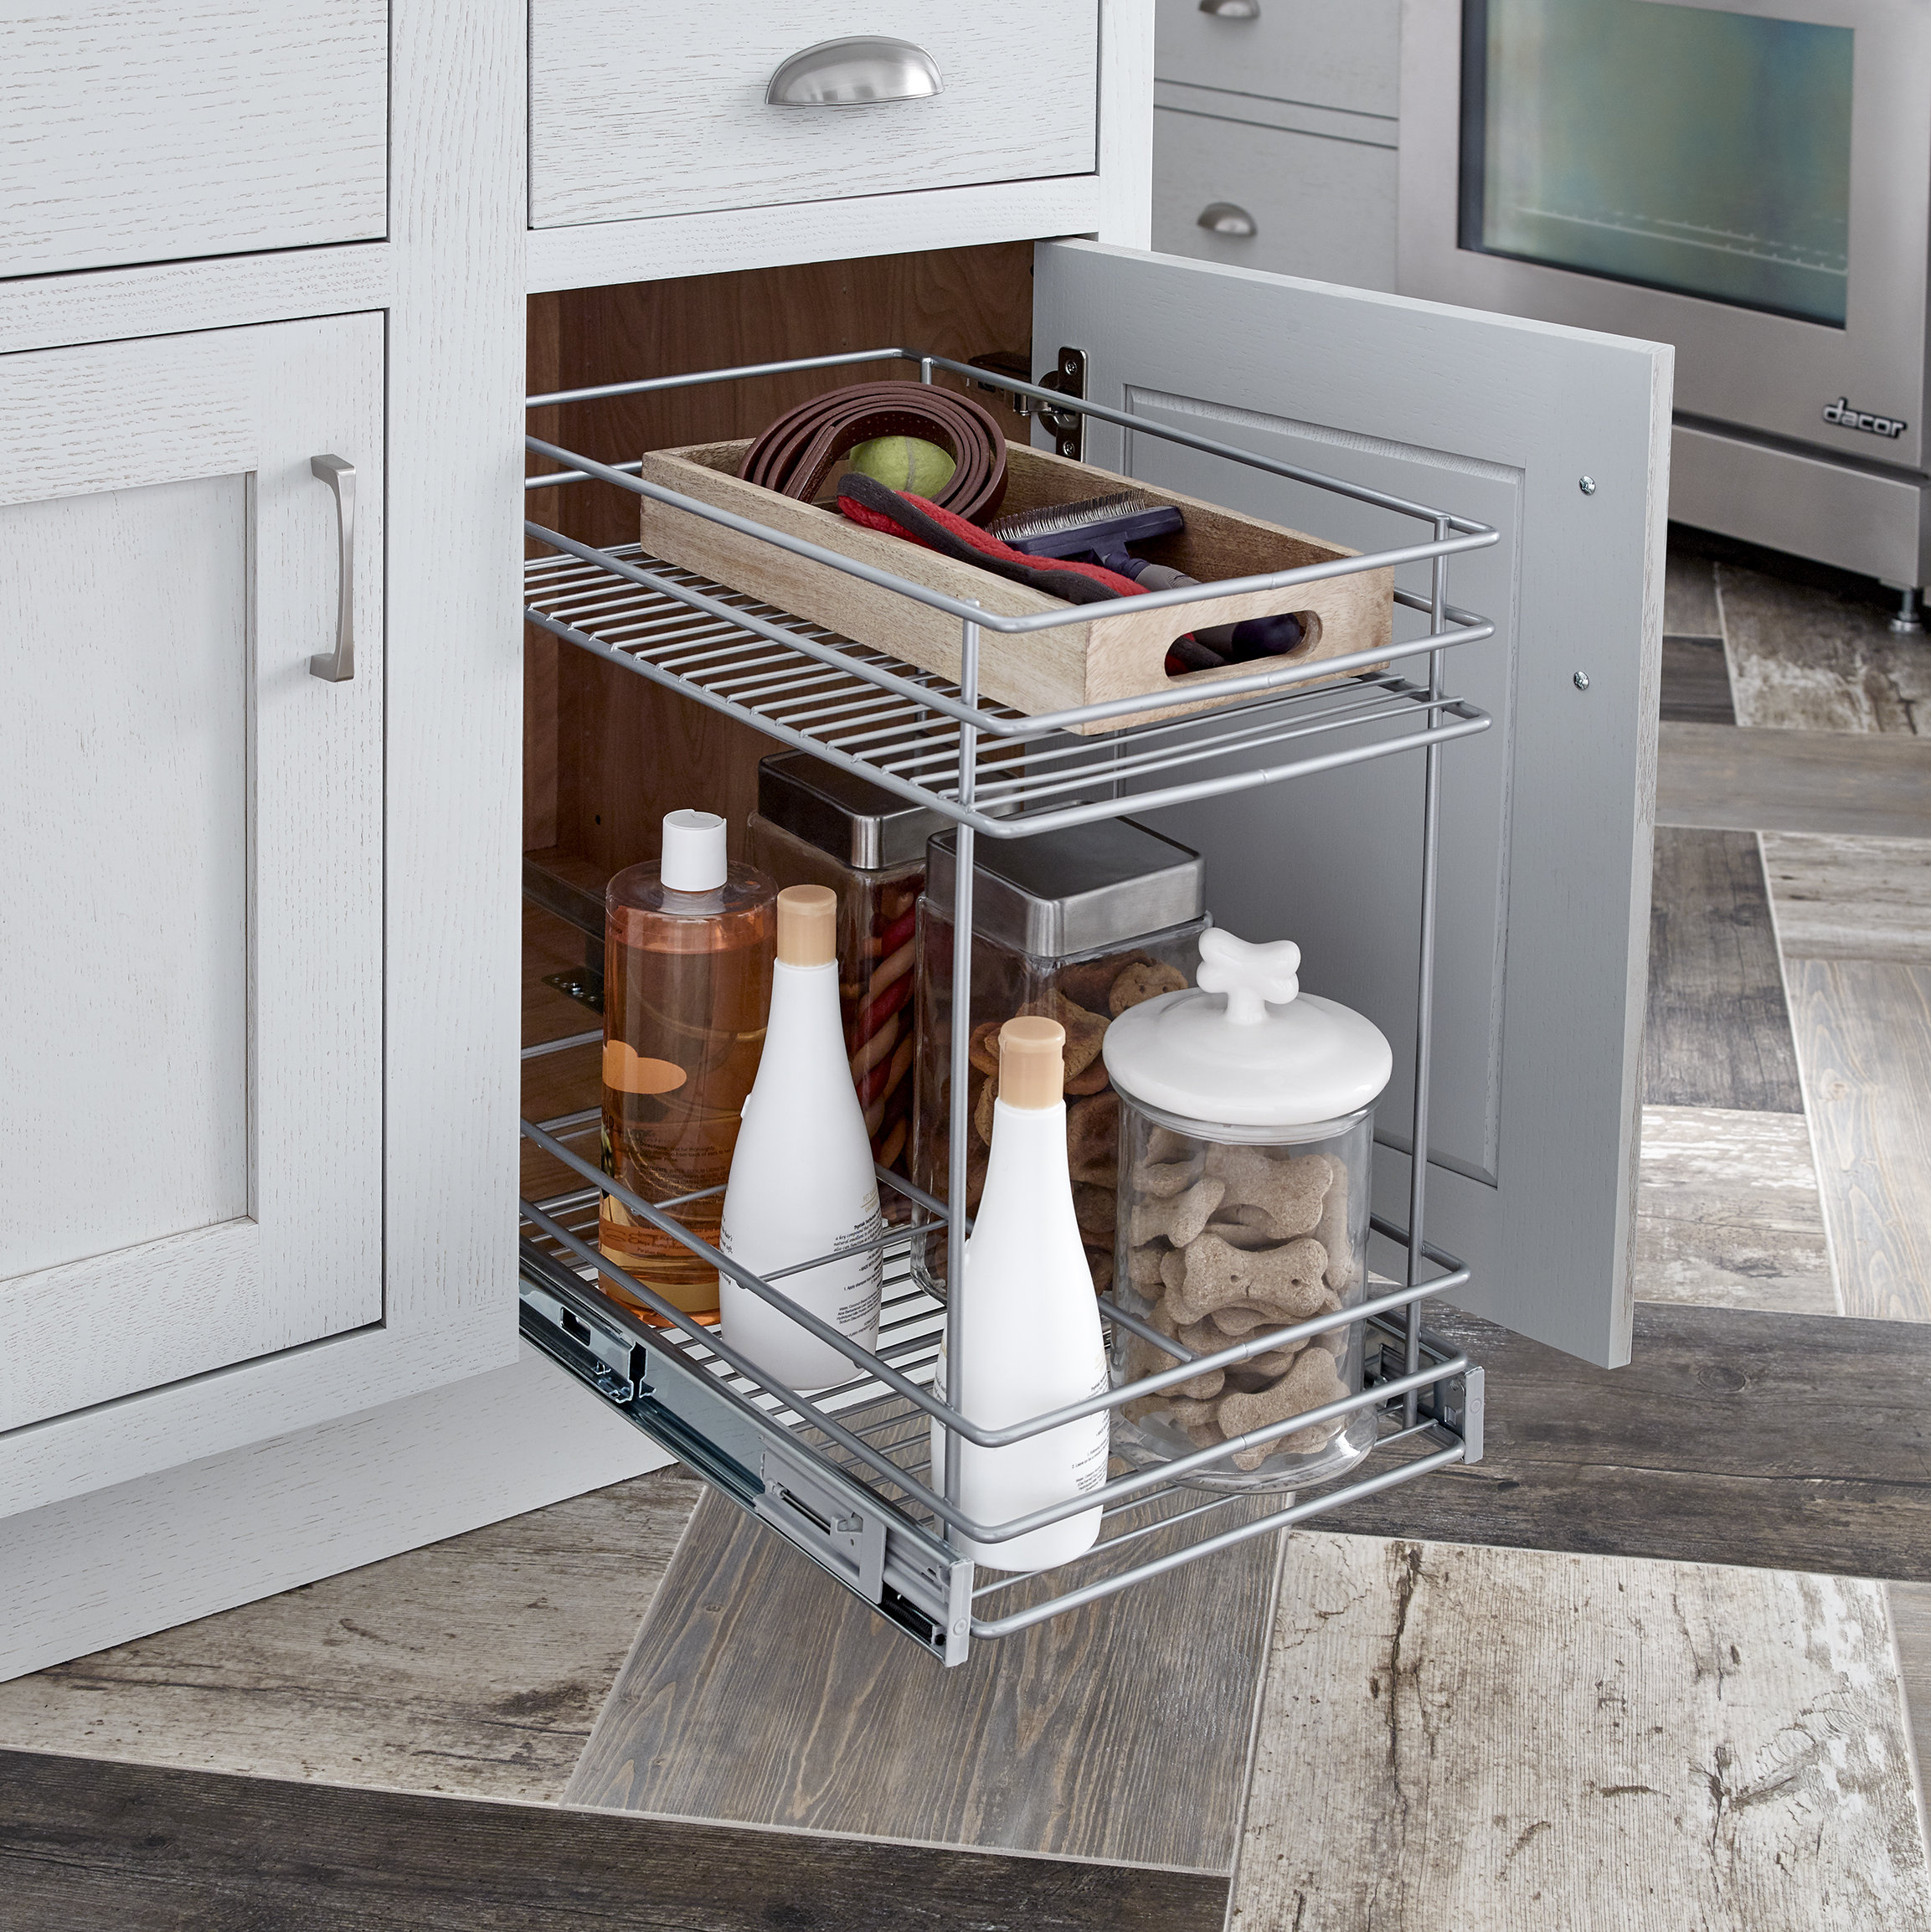 Closetmaid 2 Tier Kitchen Cabinet Pull Out Drawer Reviews